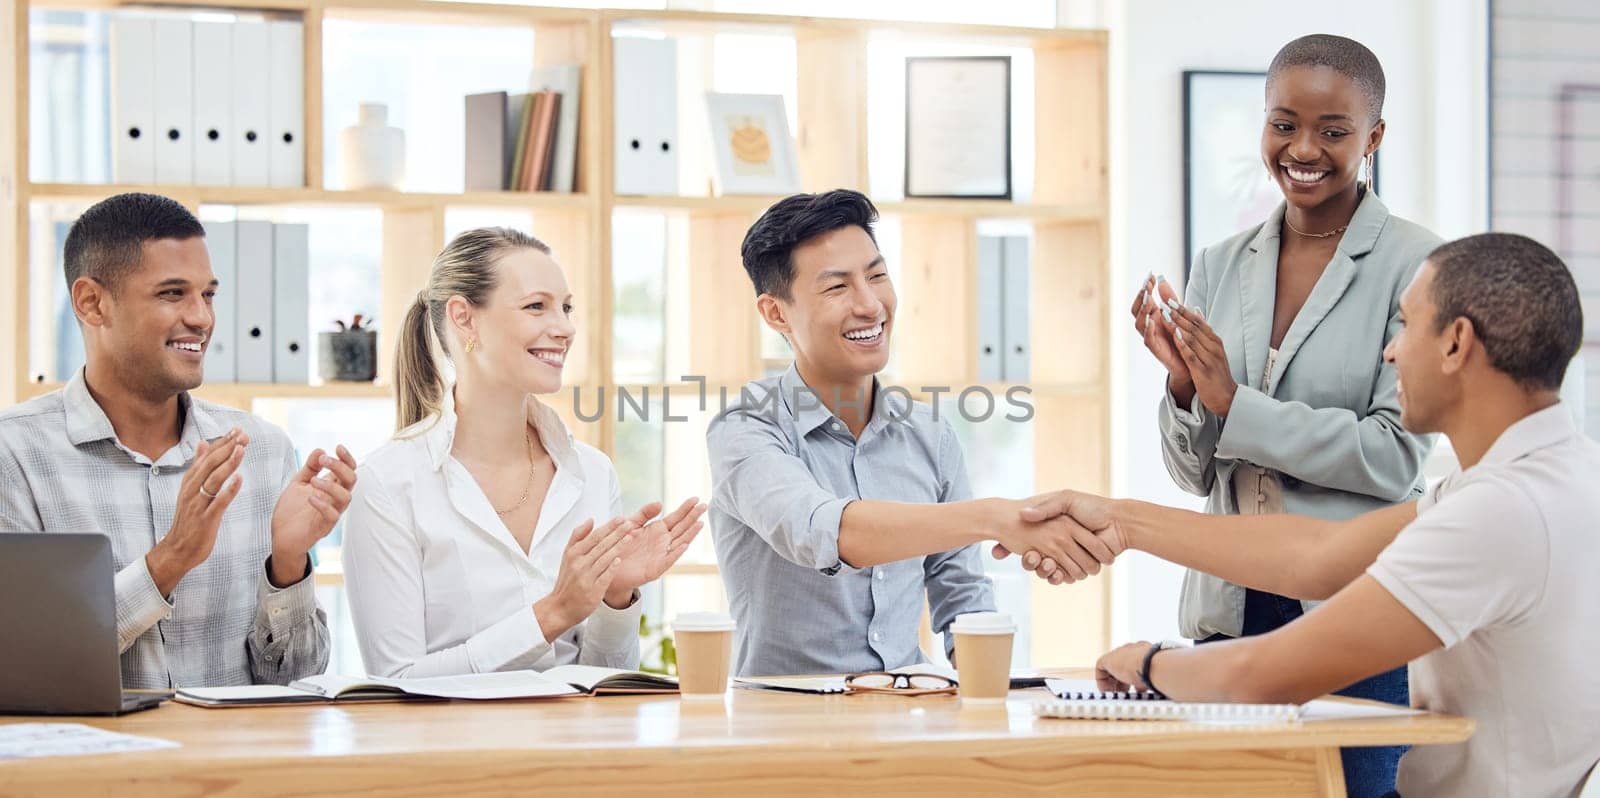 Handshake, applause and congratulations, recruitment success at startup meeting. Hand shake, thank you and a corporate welcome to new recruit or partner for business deal, achievement or agreement.